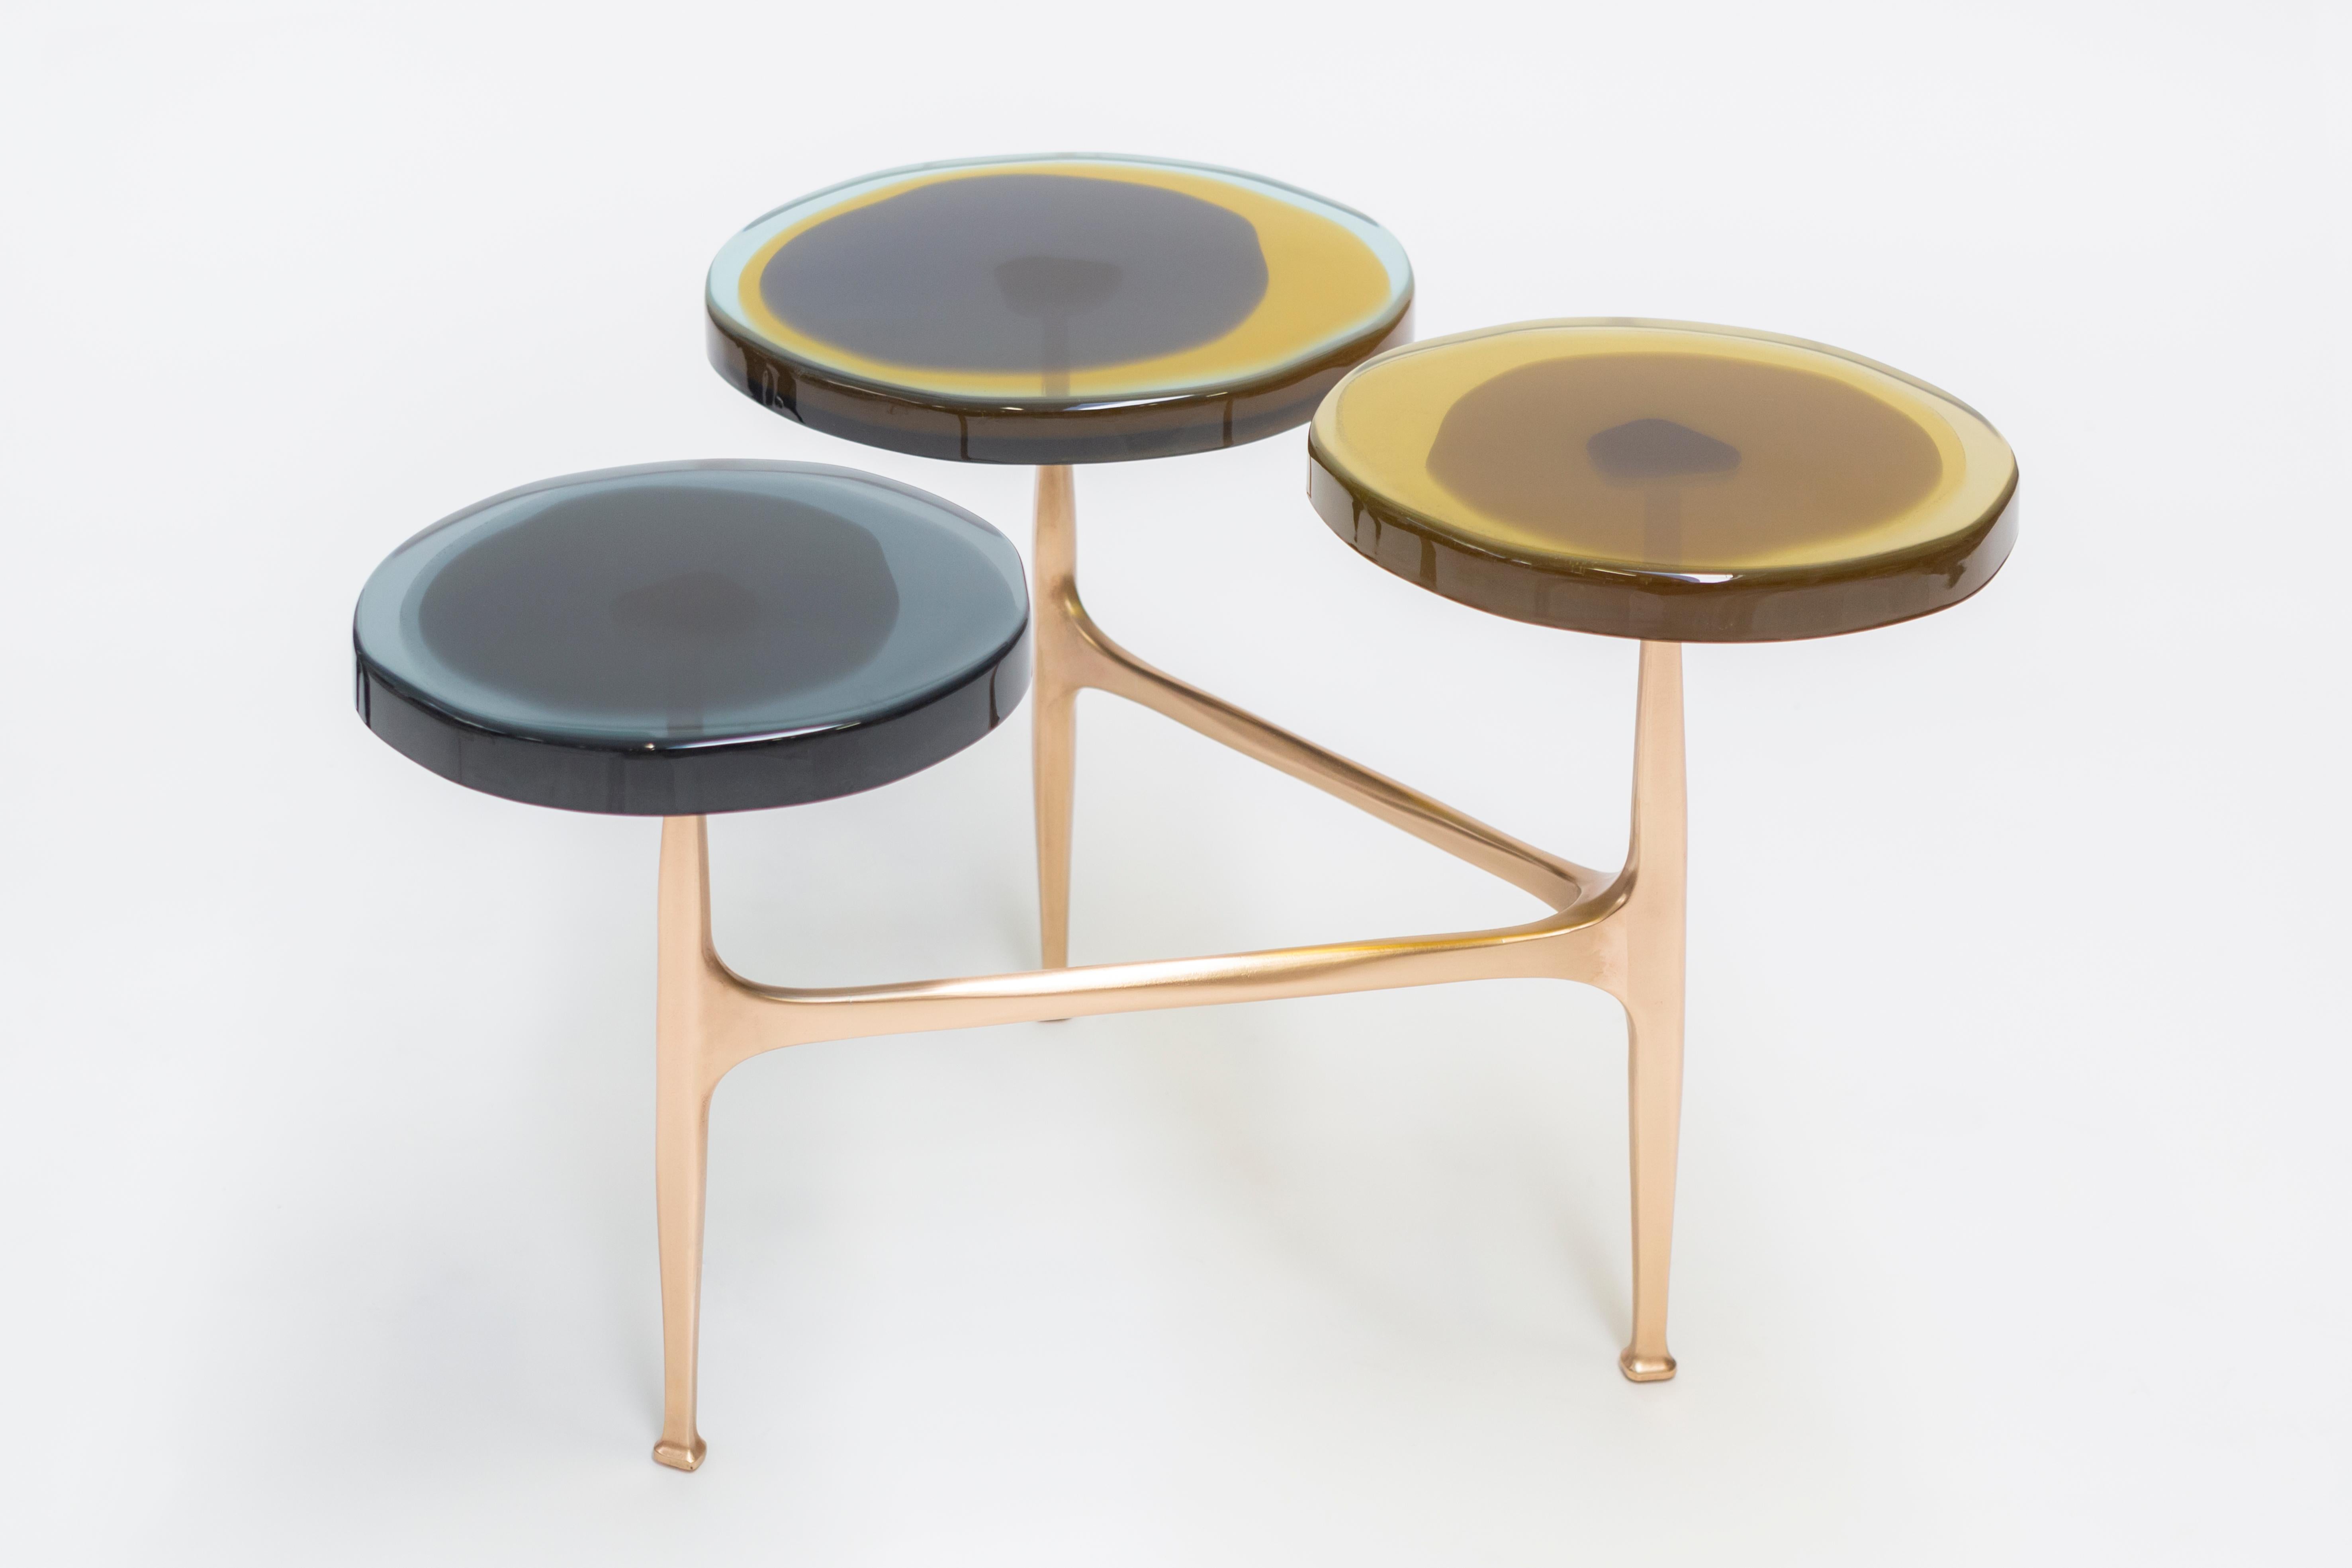 Agatha coffee table by Draga & Aurel
Dimensions: W 121 x D 80 x H 50 cm
 top Ø 32/40 cm
Materials: Resin, bronze

The Agatha coffee tables are featured by irregular circular tops of transparent and
colorful resin sit on a bronze frame with a